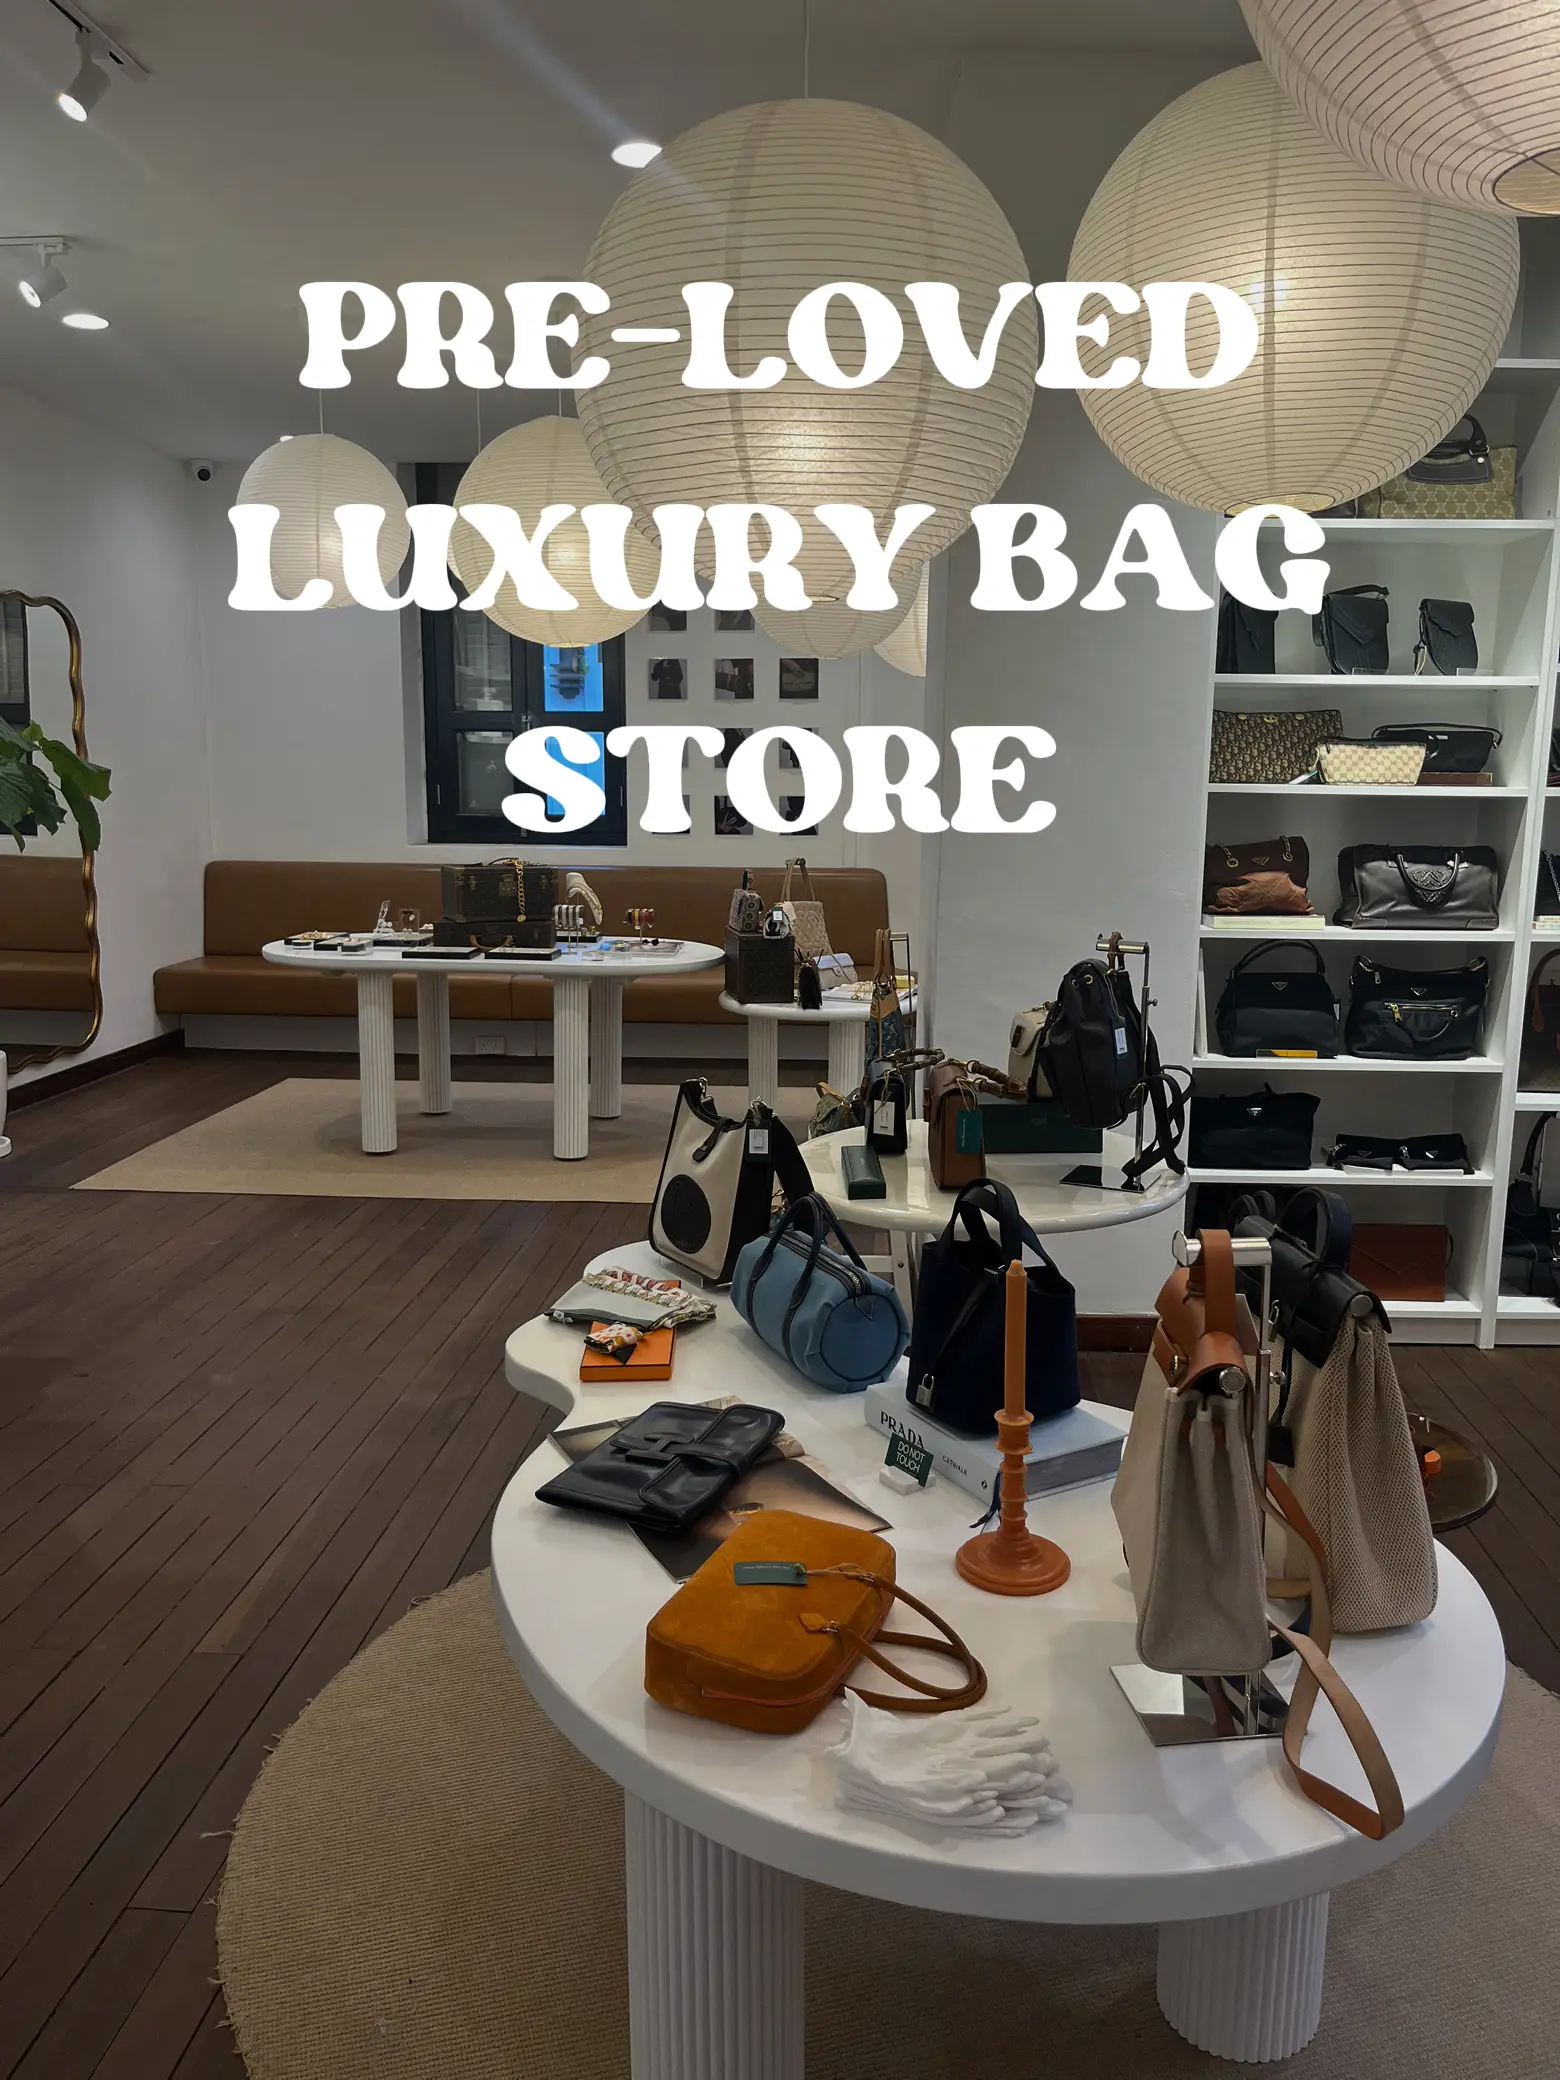 That Wild and Crazy Louis Vuitton Bags Sale in Tokyo! – The Bag Hag Diaries